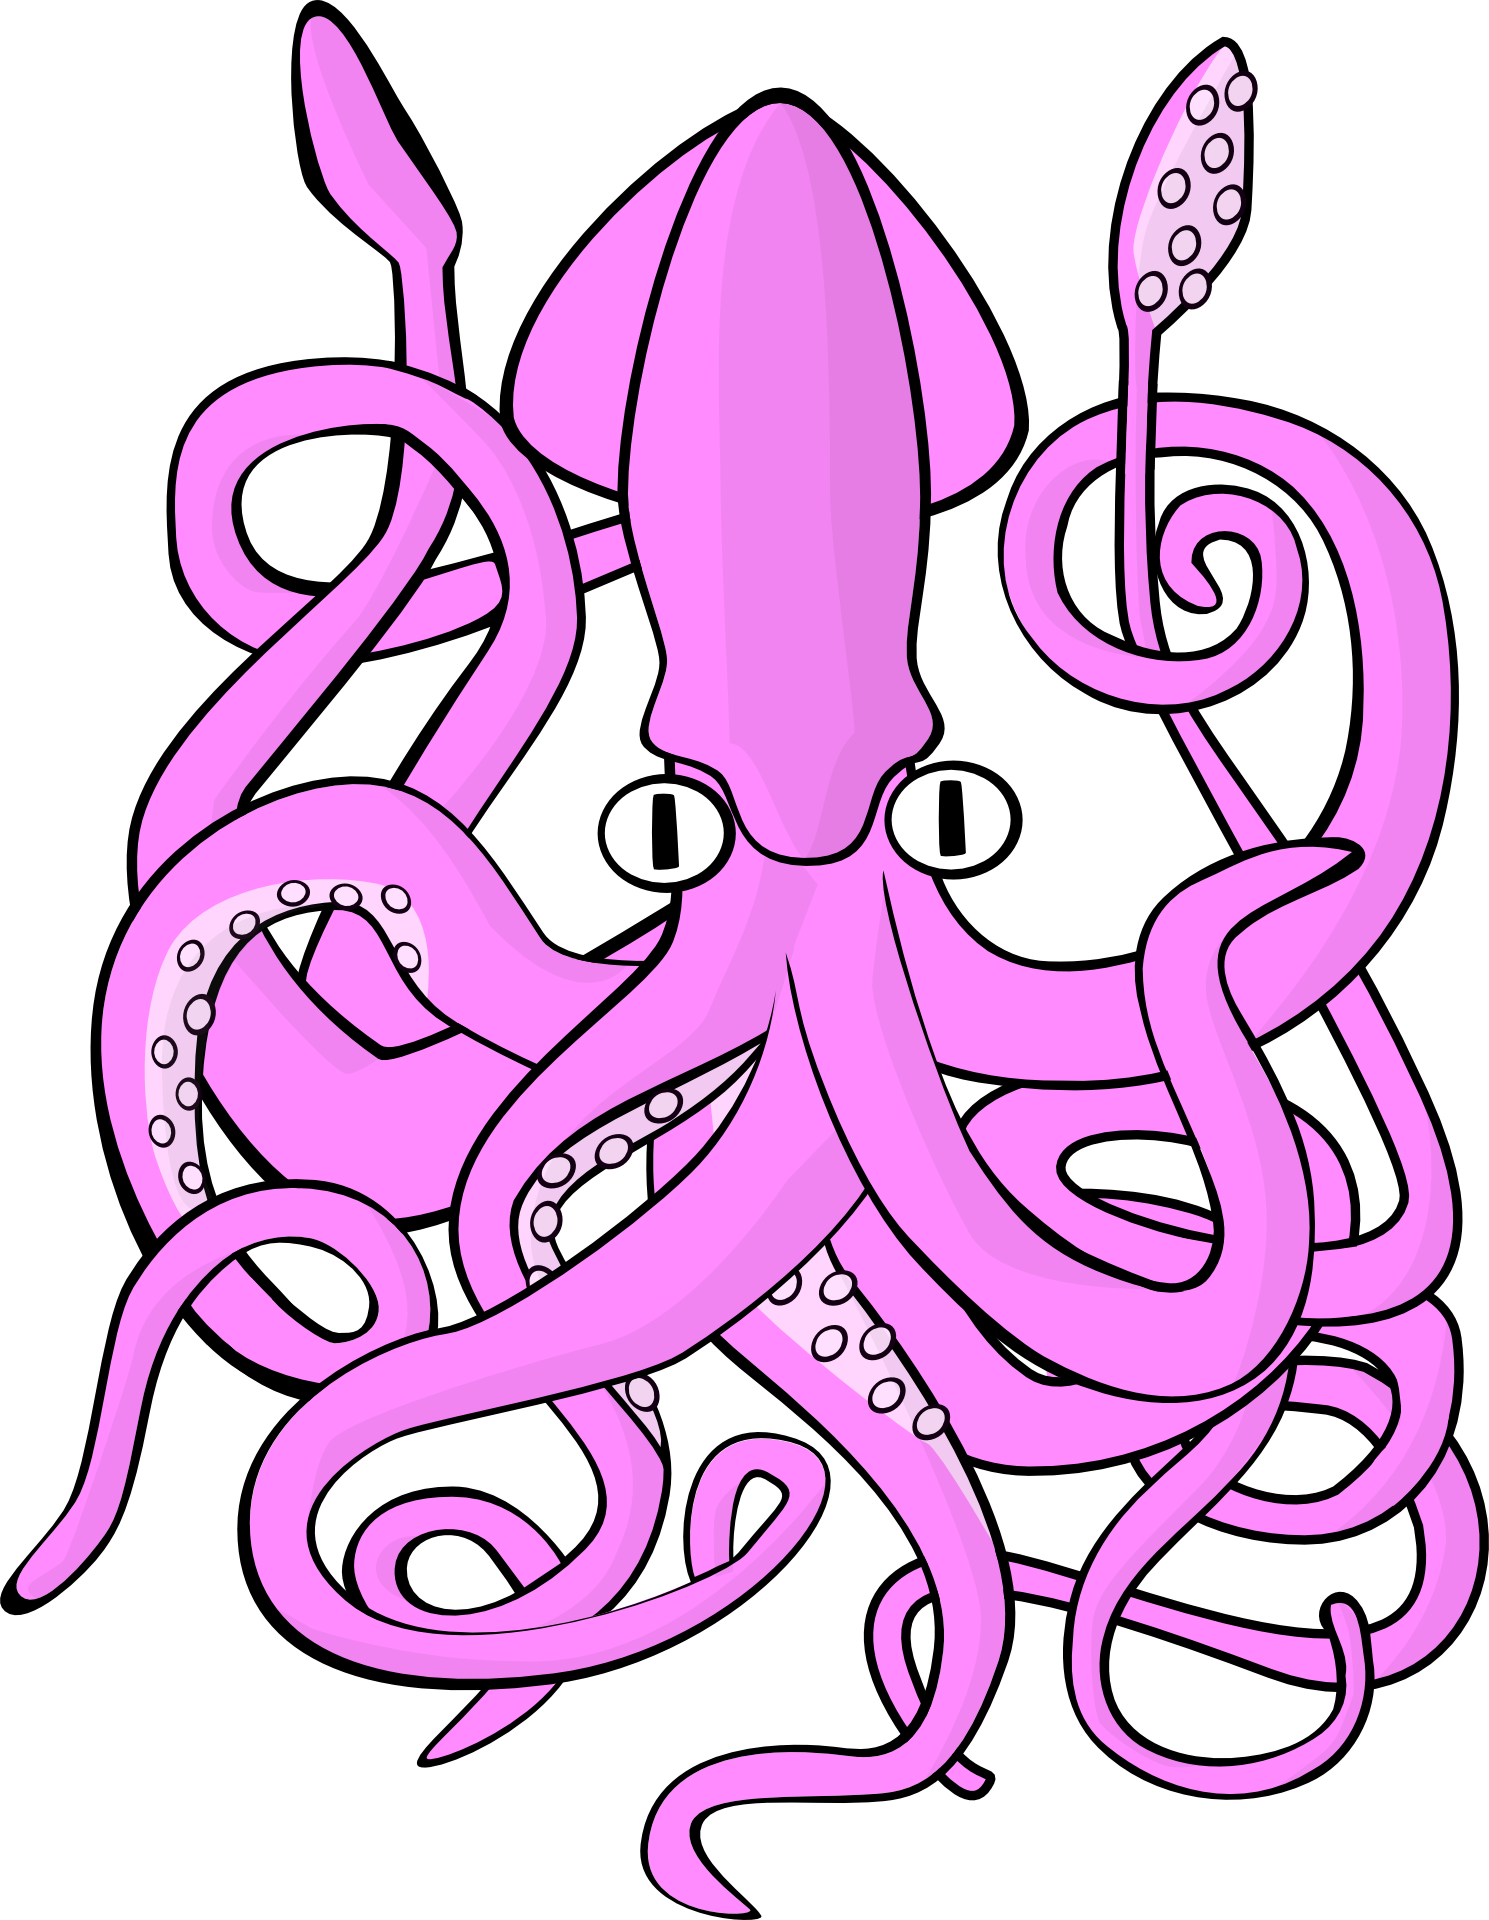 Food passes through a giant squid’s brain on the way to its stomach.